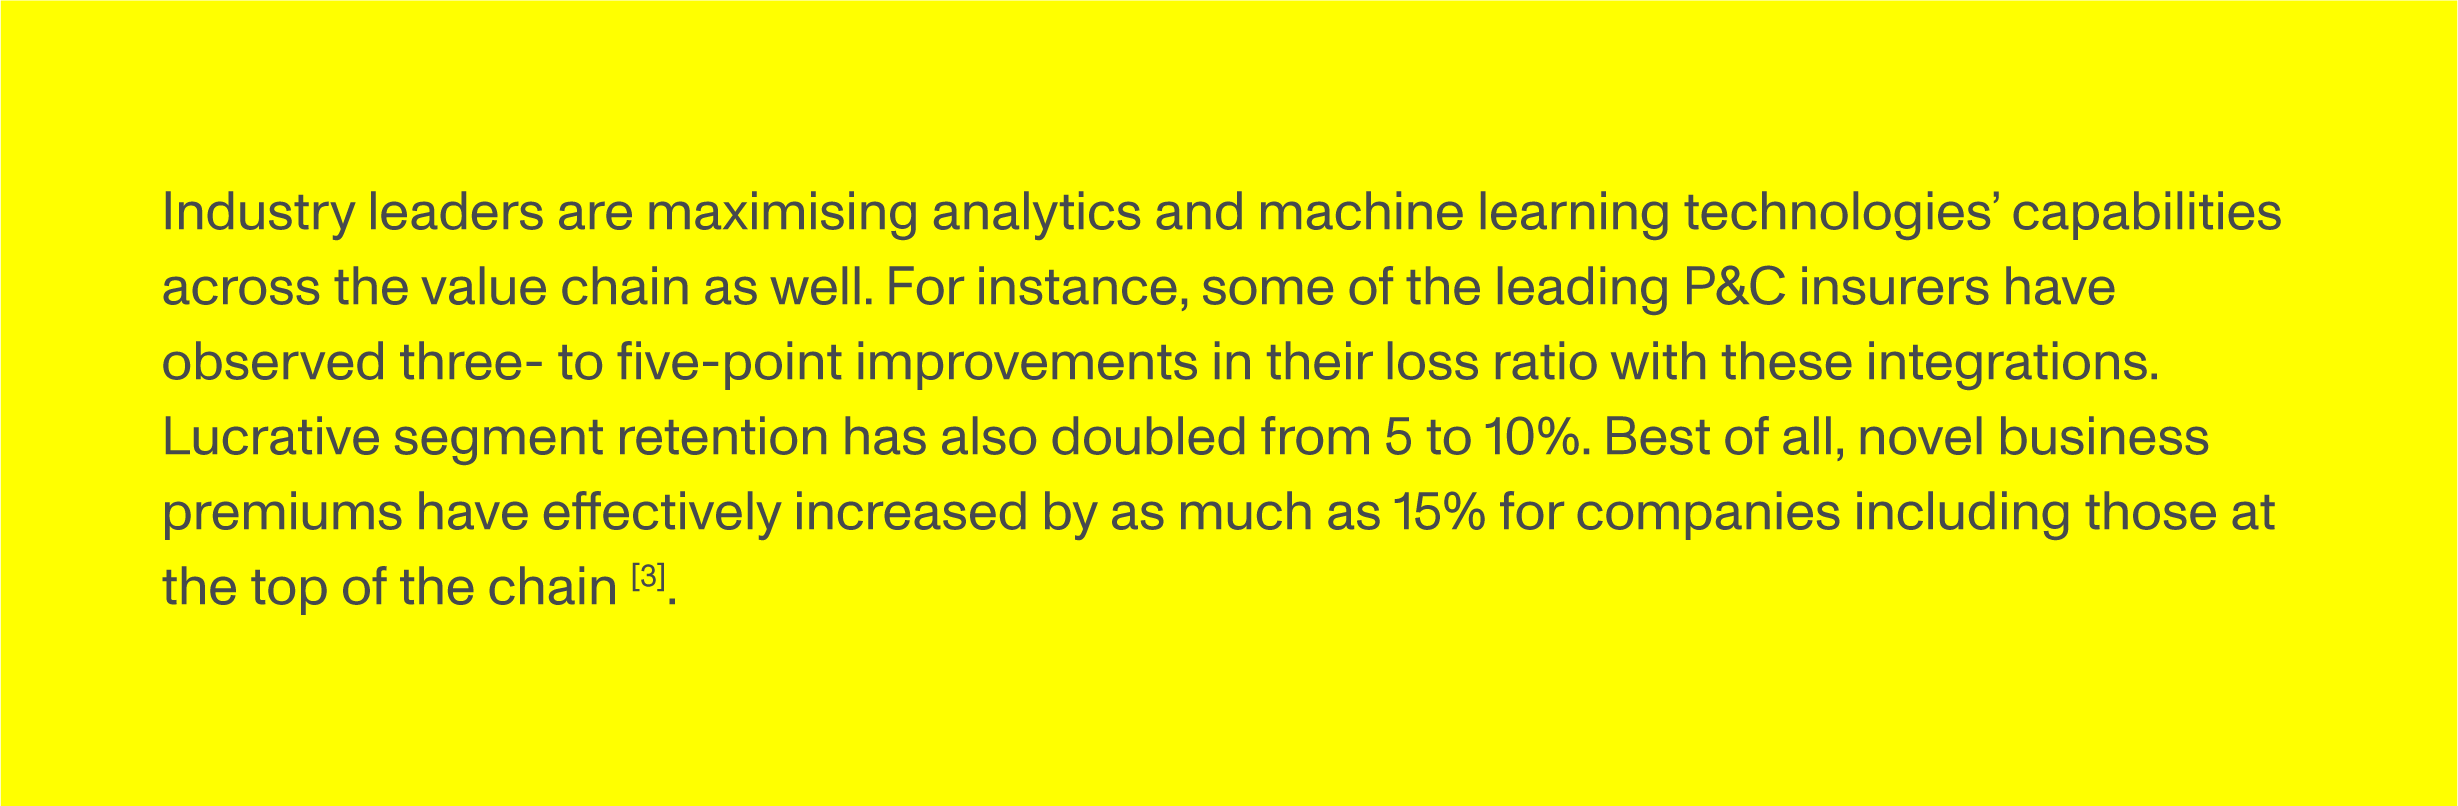 Industry leaders are maximising analytics and machine learning technologies’ capabilities across the value chain as well. For instance, some of the leading P&C insurers have observed three- to five-point improvements in their loss ratio with these integrations. Lucrative segment retention has also doubled from 5 to 10%. Best of all, novel business premiums have effectively increased by as much as 15% for companies including those at the top of the chain [3].